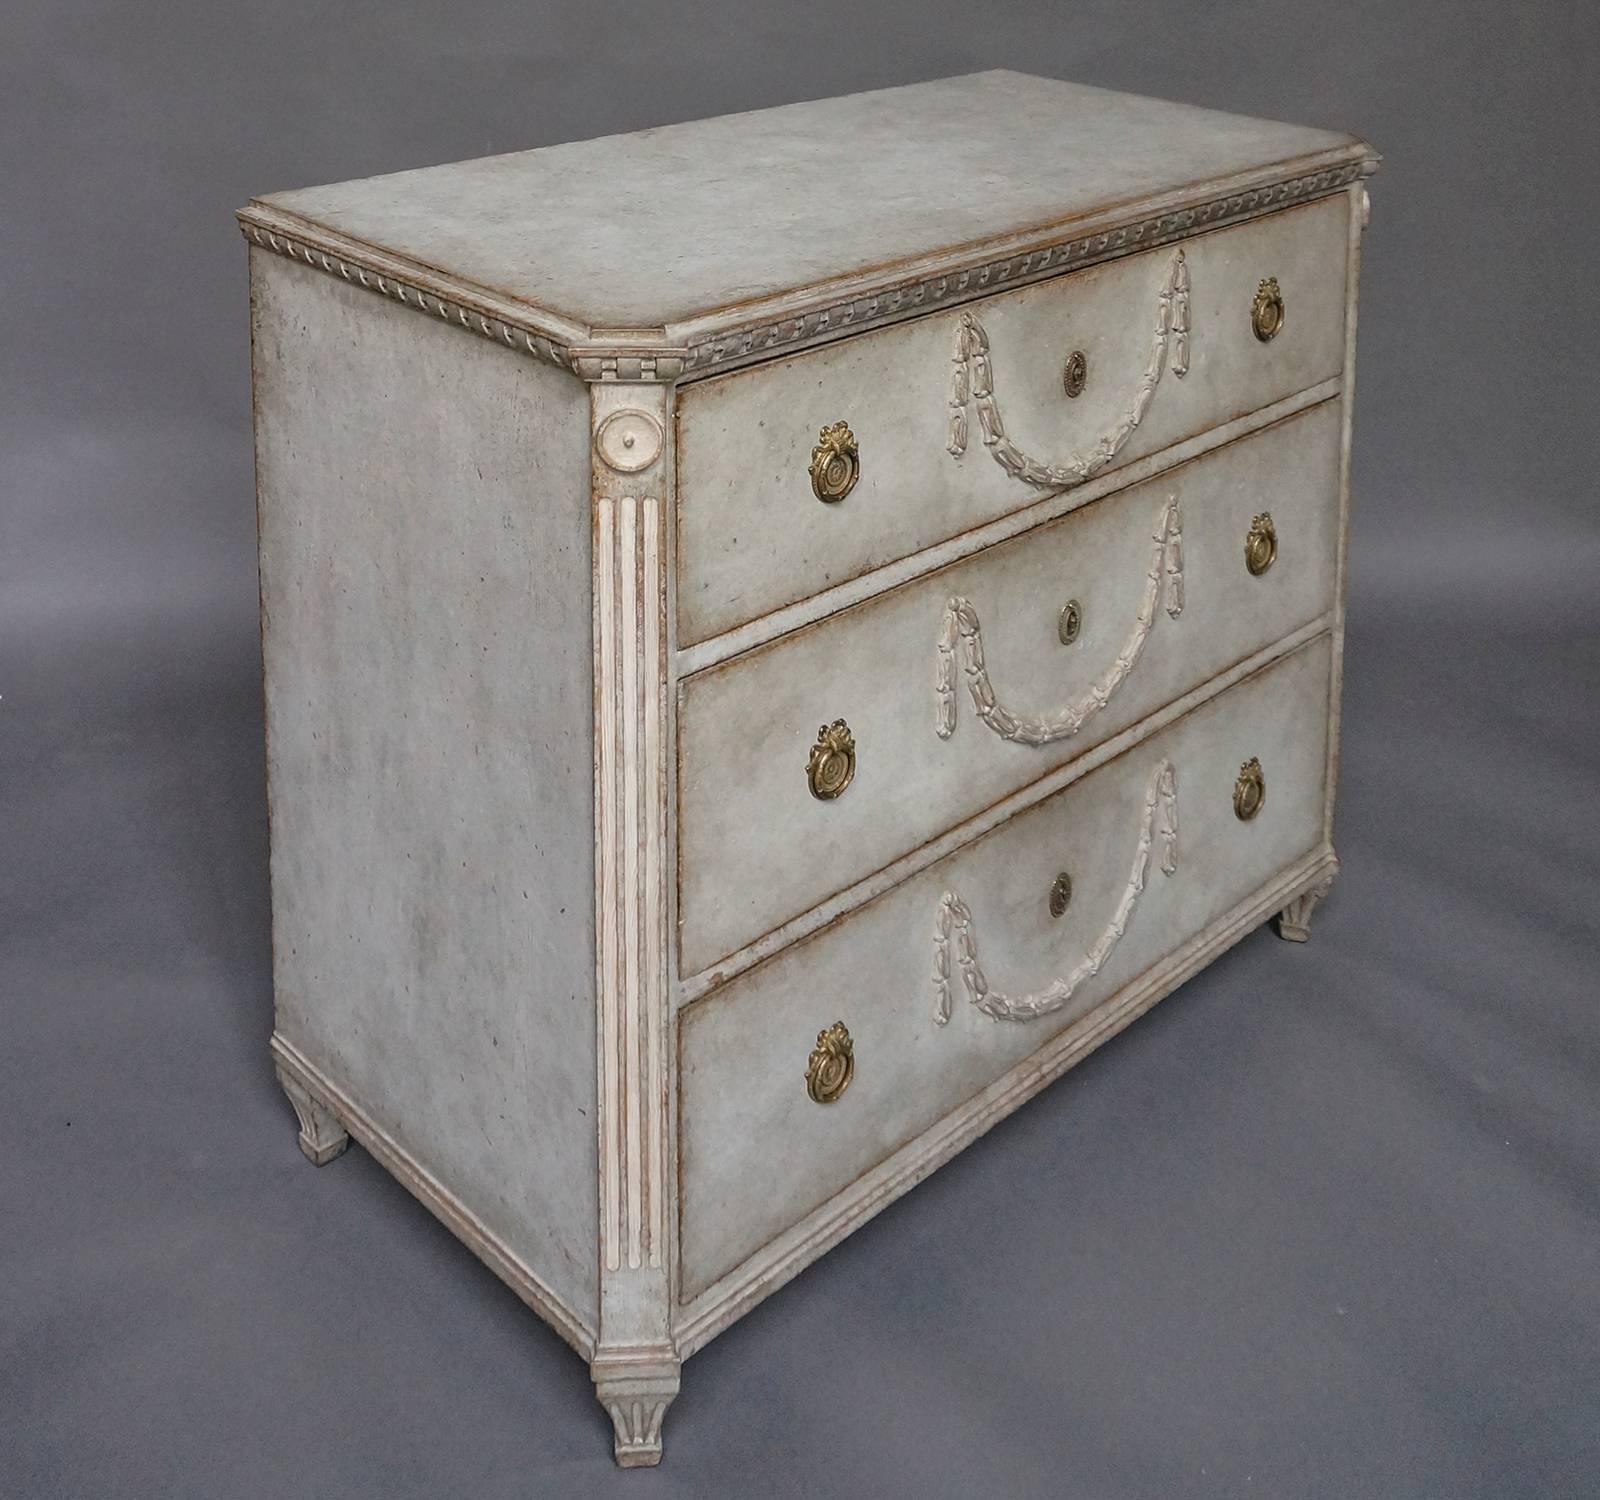 Neoclassical chest of drawers, Sweden, circa 1860, with applied laurel swags on the three-drawer fronts. Reeded corner posts and rod and ribbon carving under the shaped top. A truly special piece.